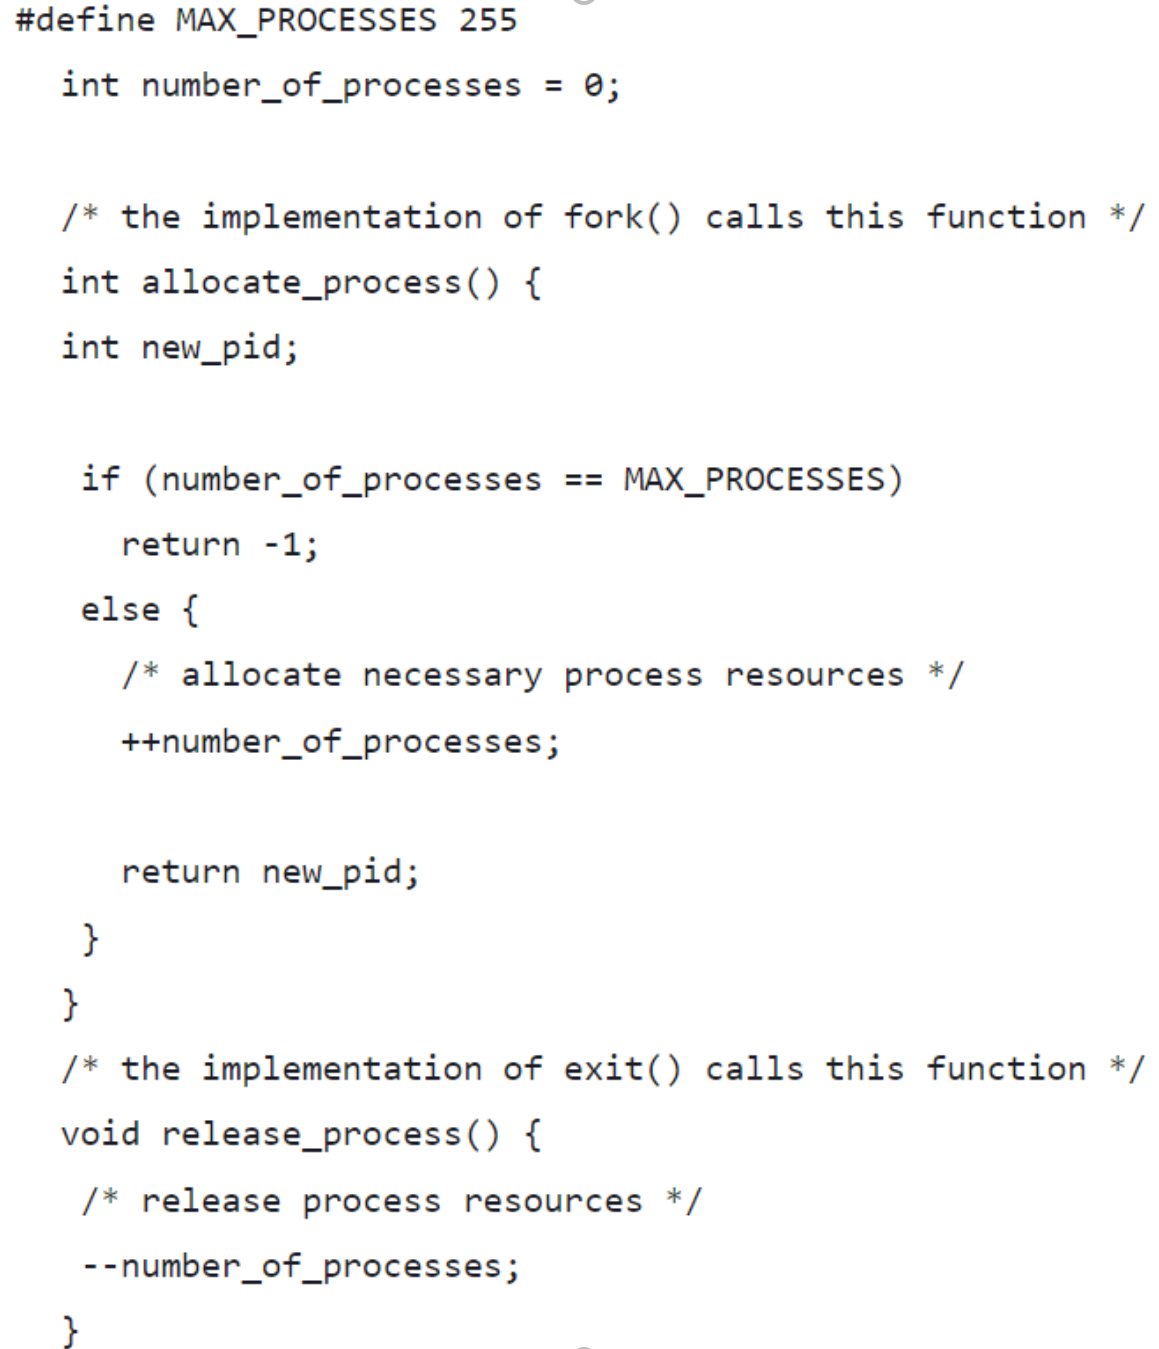 #define MAX_PROCESSES 255
int number_of_processes
0;
%3D
/* the implementation of fork() calls this function */
int allocate_process() {
int new_pid;
if (number_of_processes
MAX_PROCESSES)
==
return -1;
else {
/* allocate necessary process resources */
++number_of_processes;
return new_pid;
}
}
/* the implementation of exit() calls this function */
void release_process() {
/* release process resources
--number_of_processes;
